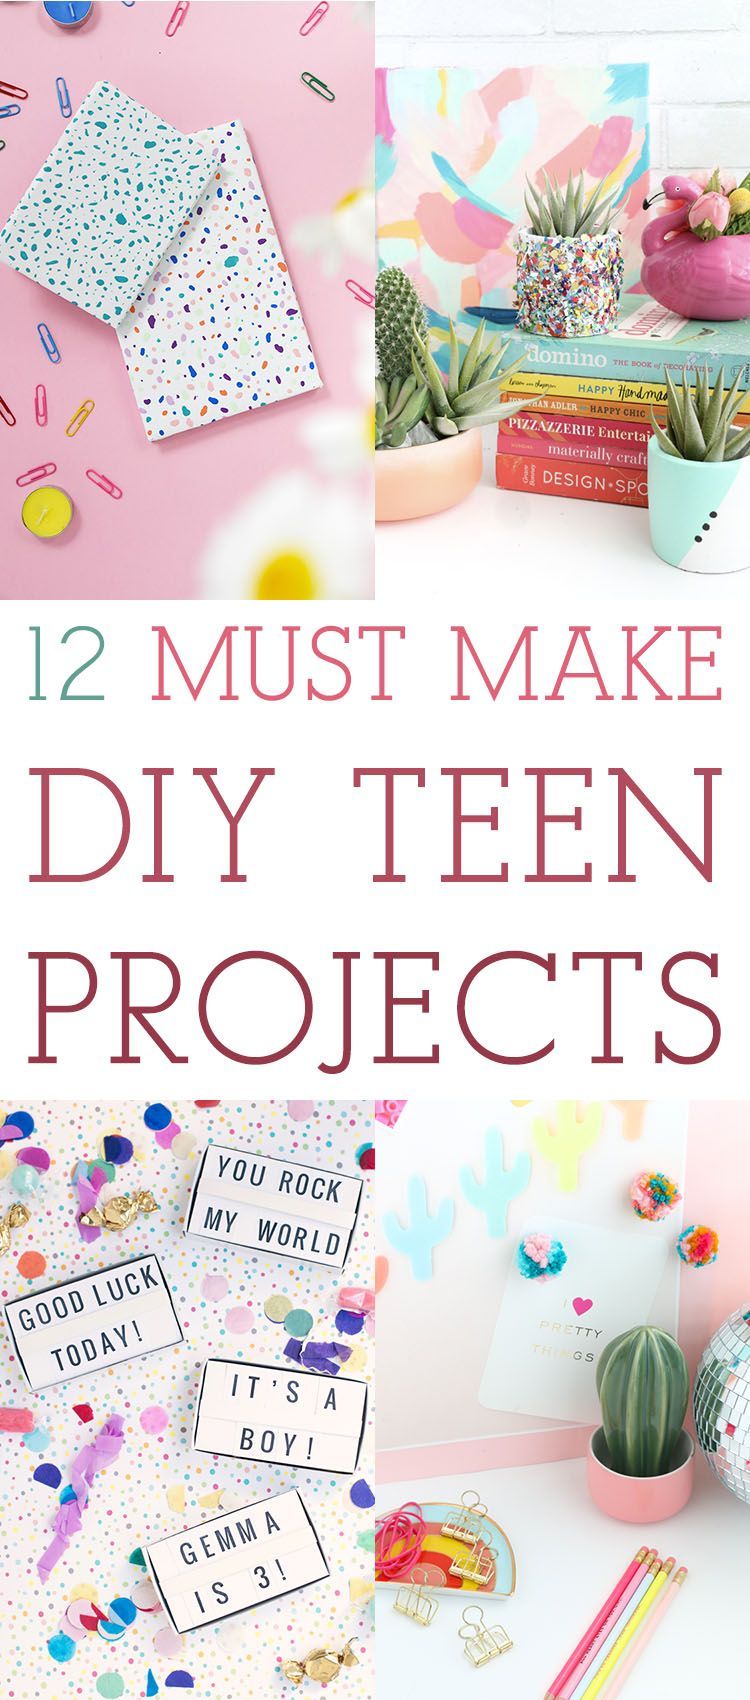 12 Must Make DIY Teen Projects! // Great for Gifts - The Cottage Market - 12 Must Make DIY Teen Projects! // Great for Gifts - The Cottage Market -   11 diy Pillows for teens ideas